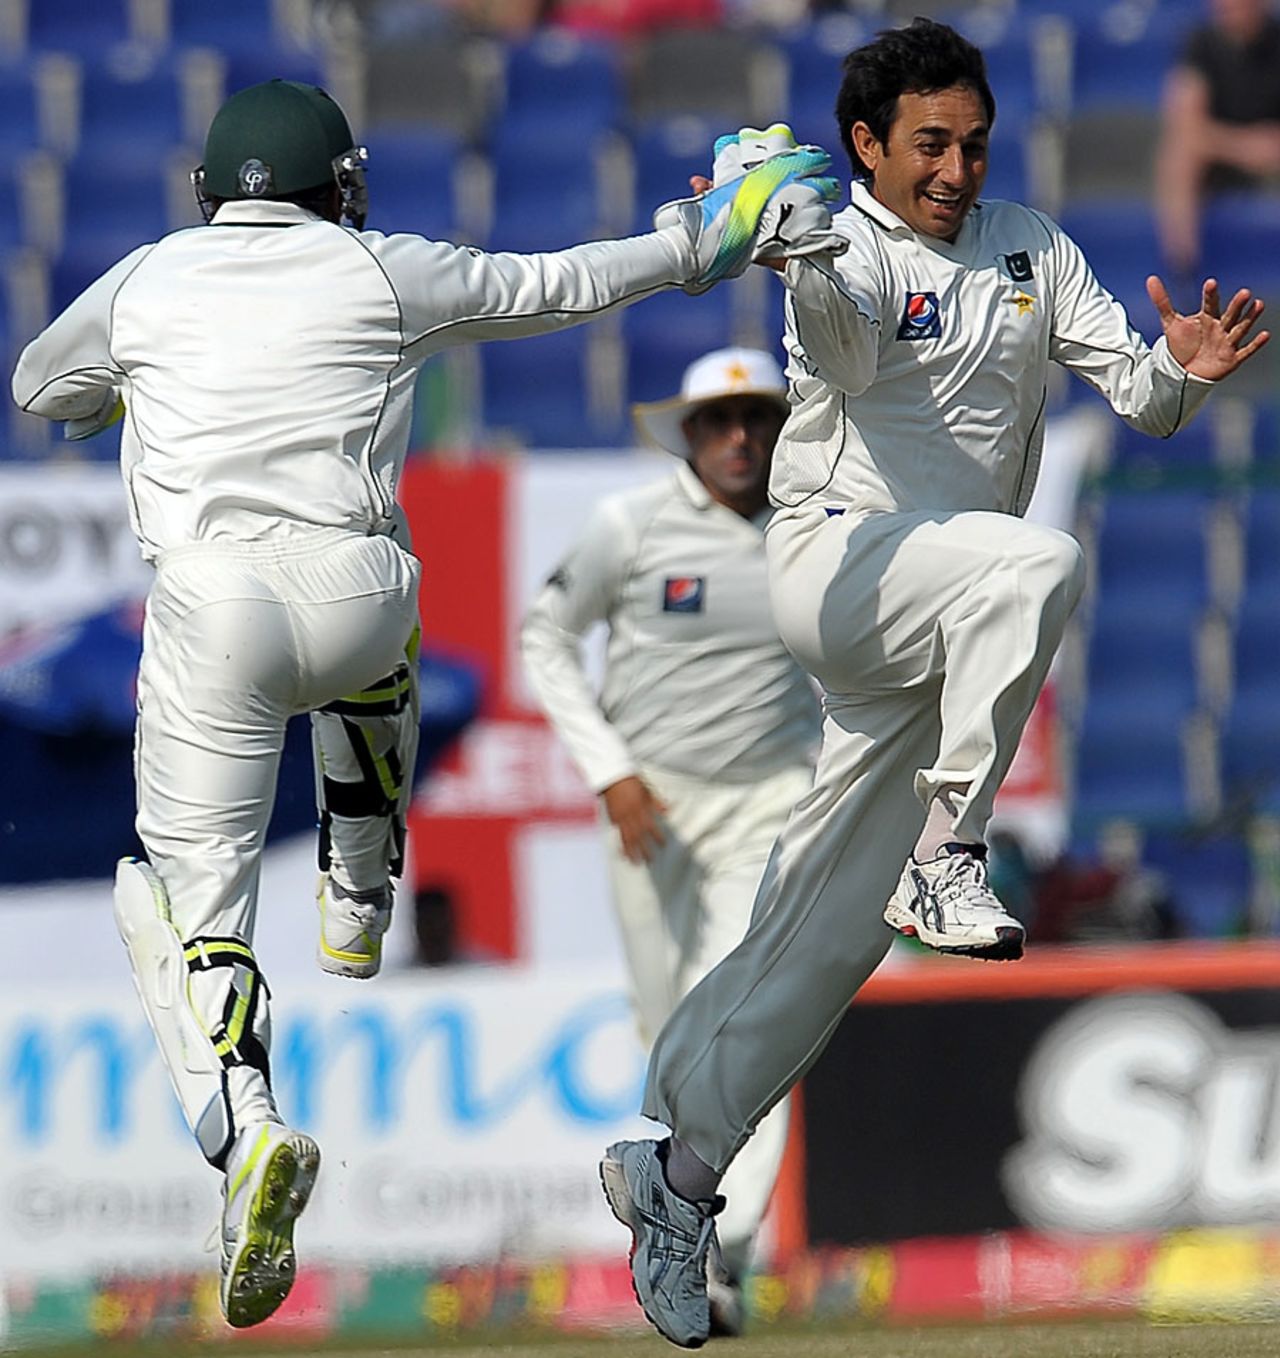 Saeed Ajmal is ecstatic after getting rid of Ian Bell, Pakistan v England, 2nd Test, Abu Dhabi, 4th day, January 28, 2012